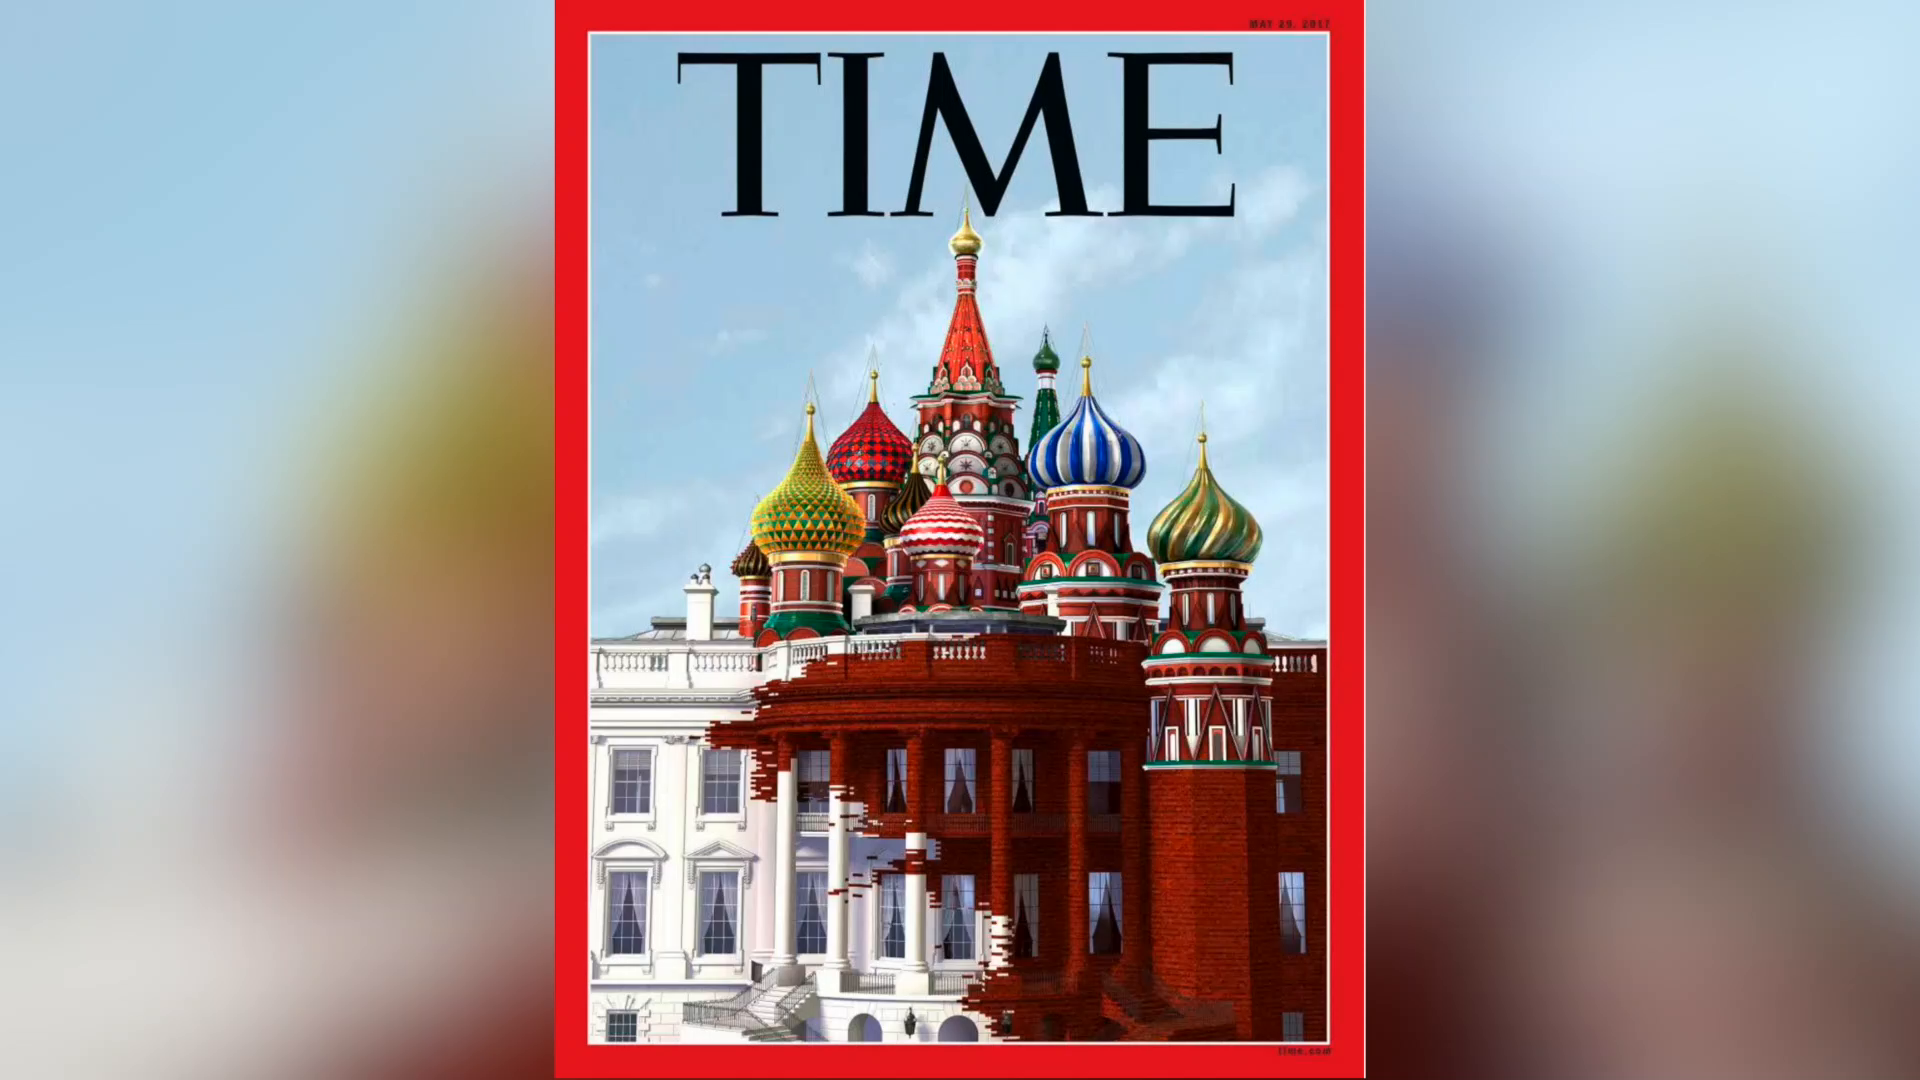 TIME's New Cover Gives The White House A Russian Renovation